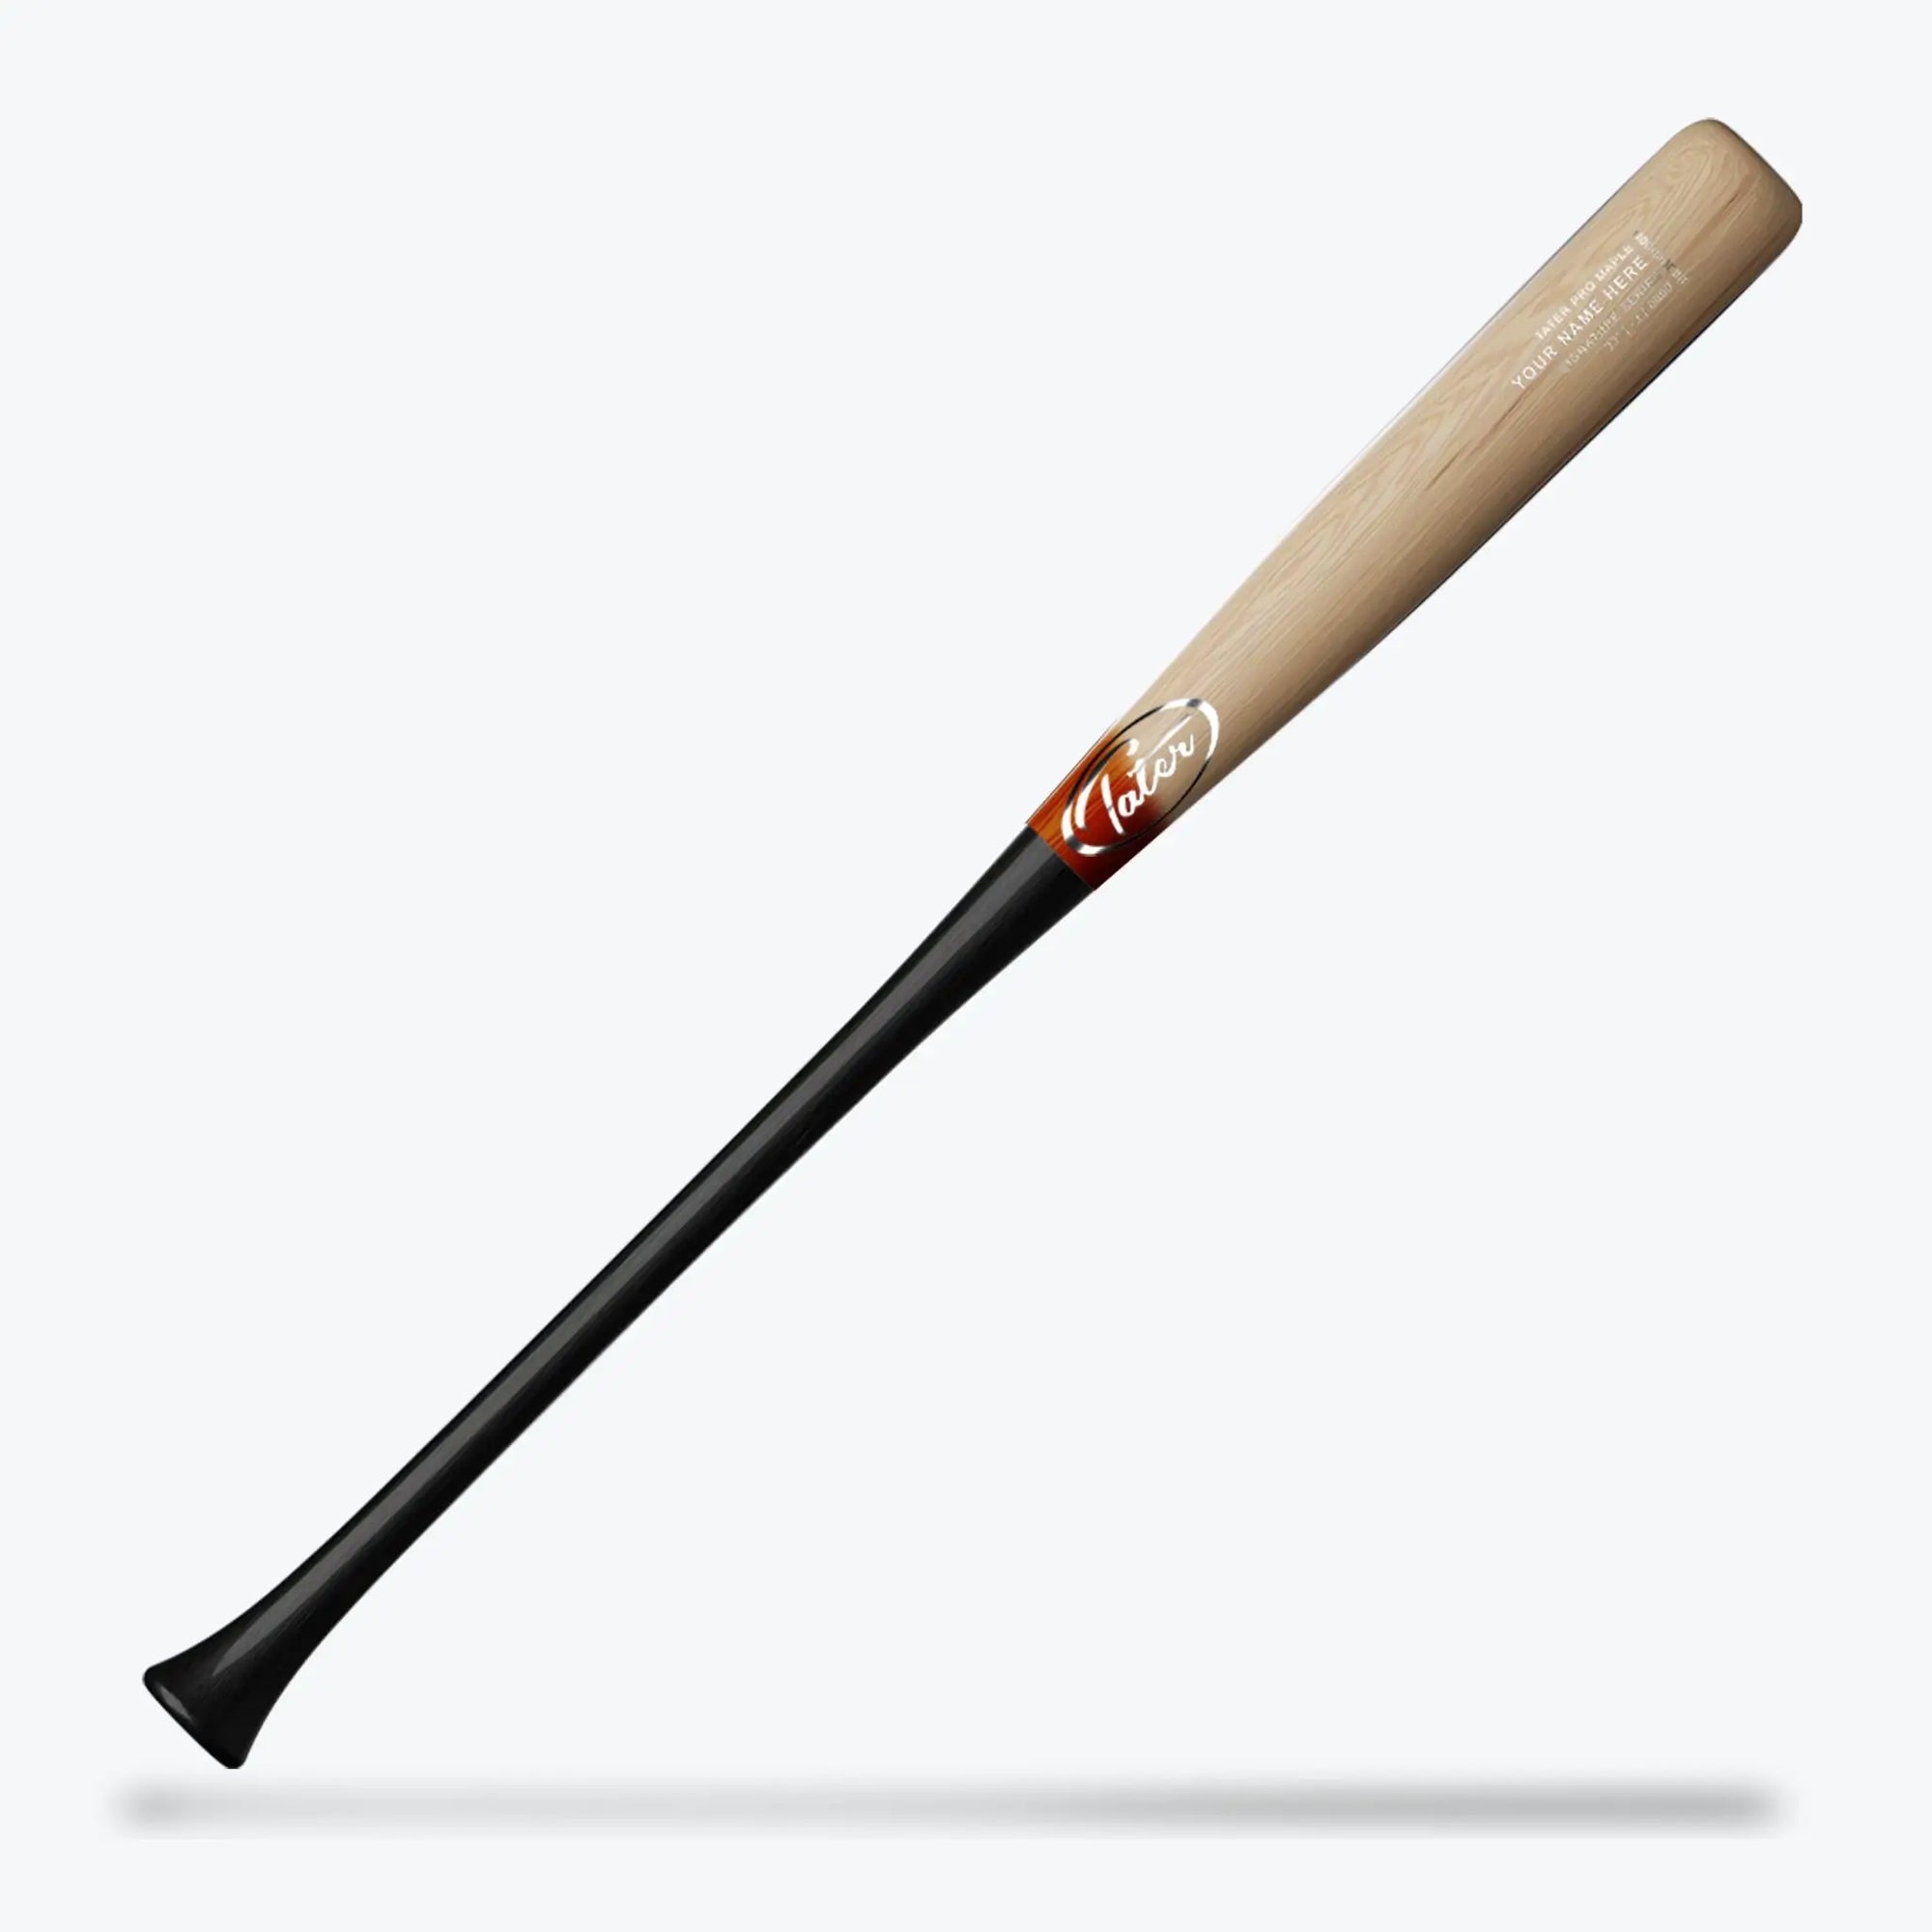 Pictured is a Tater J21 custom wood bat, a knobless design to reduce the risk of hamate bone injuries, with a natural wood finish on the barrel that contrasts with a sleek black handle. The bat's drop-3 weight makes it a solid choice for players seeking both safety and performance customization.